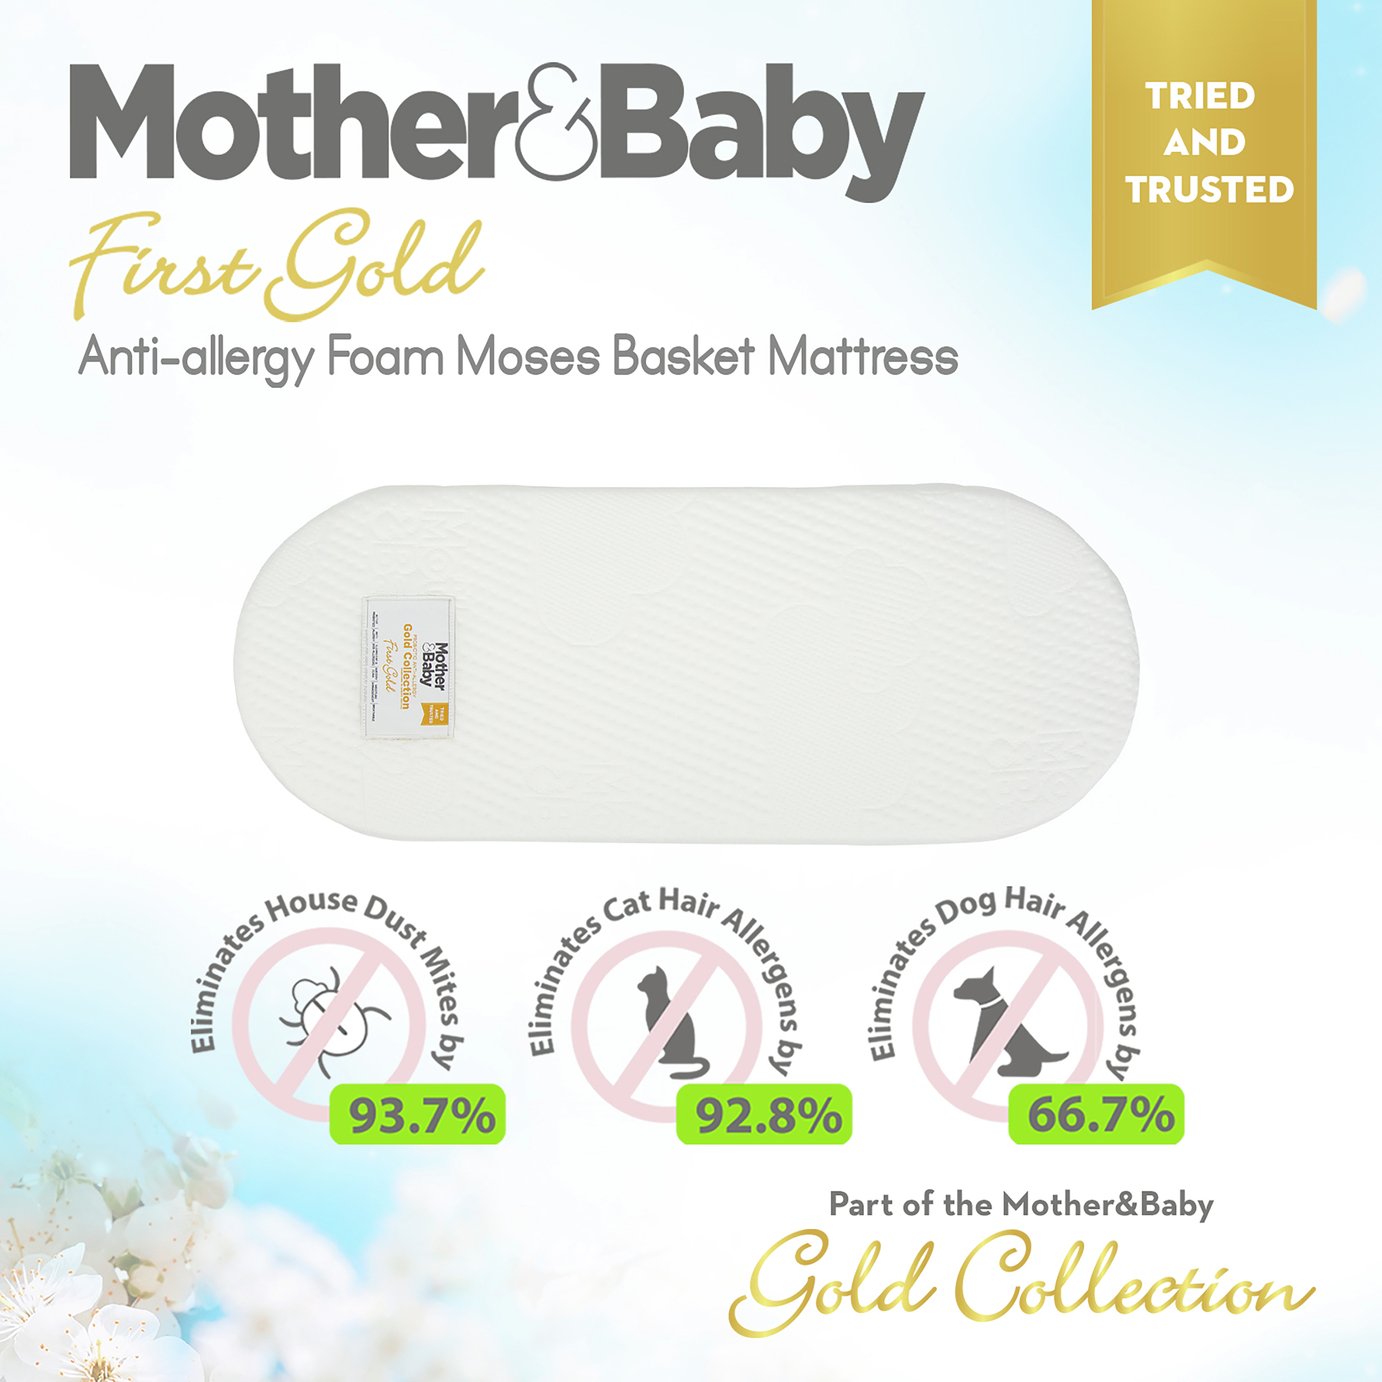 Mother&Baby First Gold AntiAllergy Moses Mattress 75x28 Review